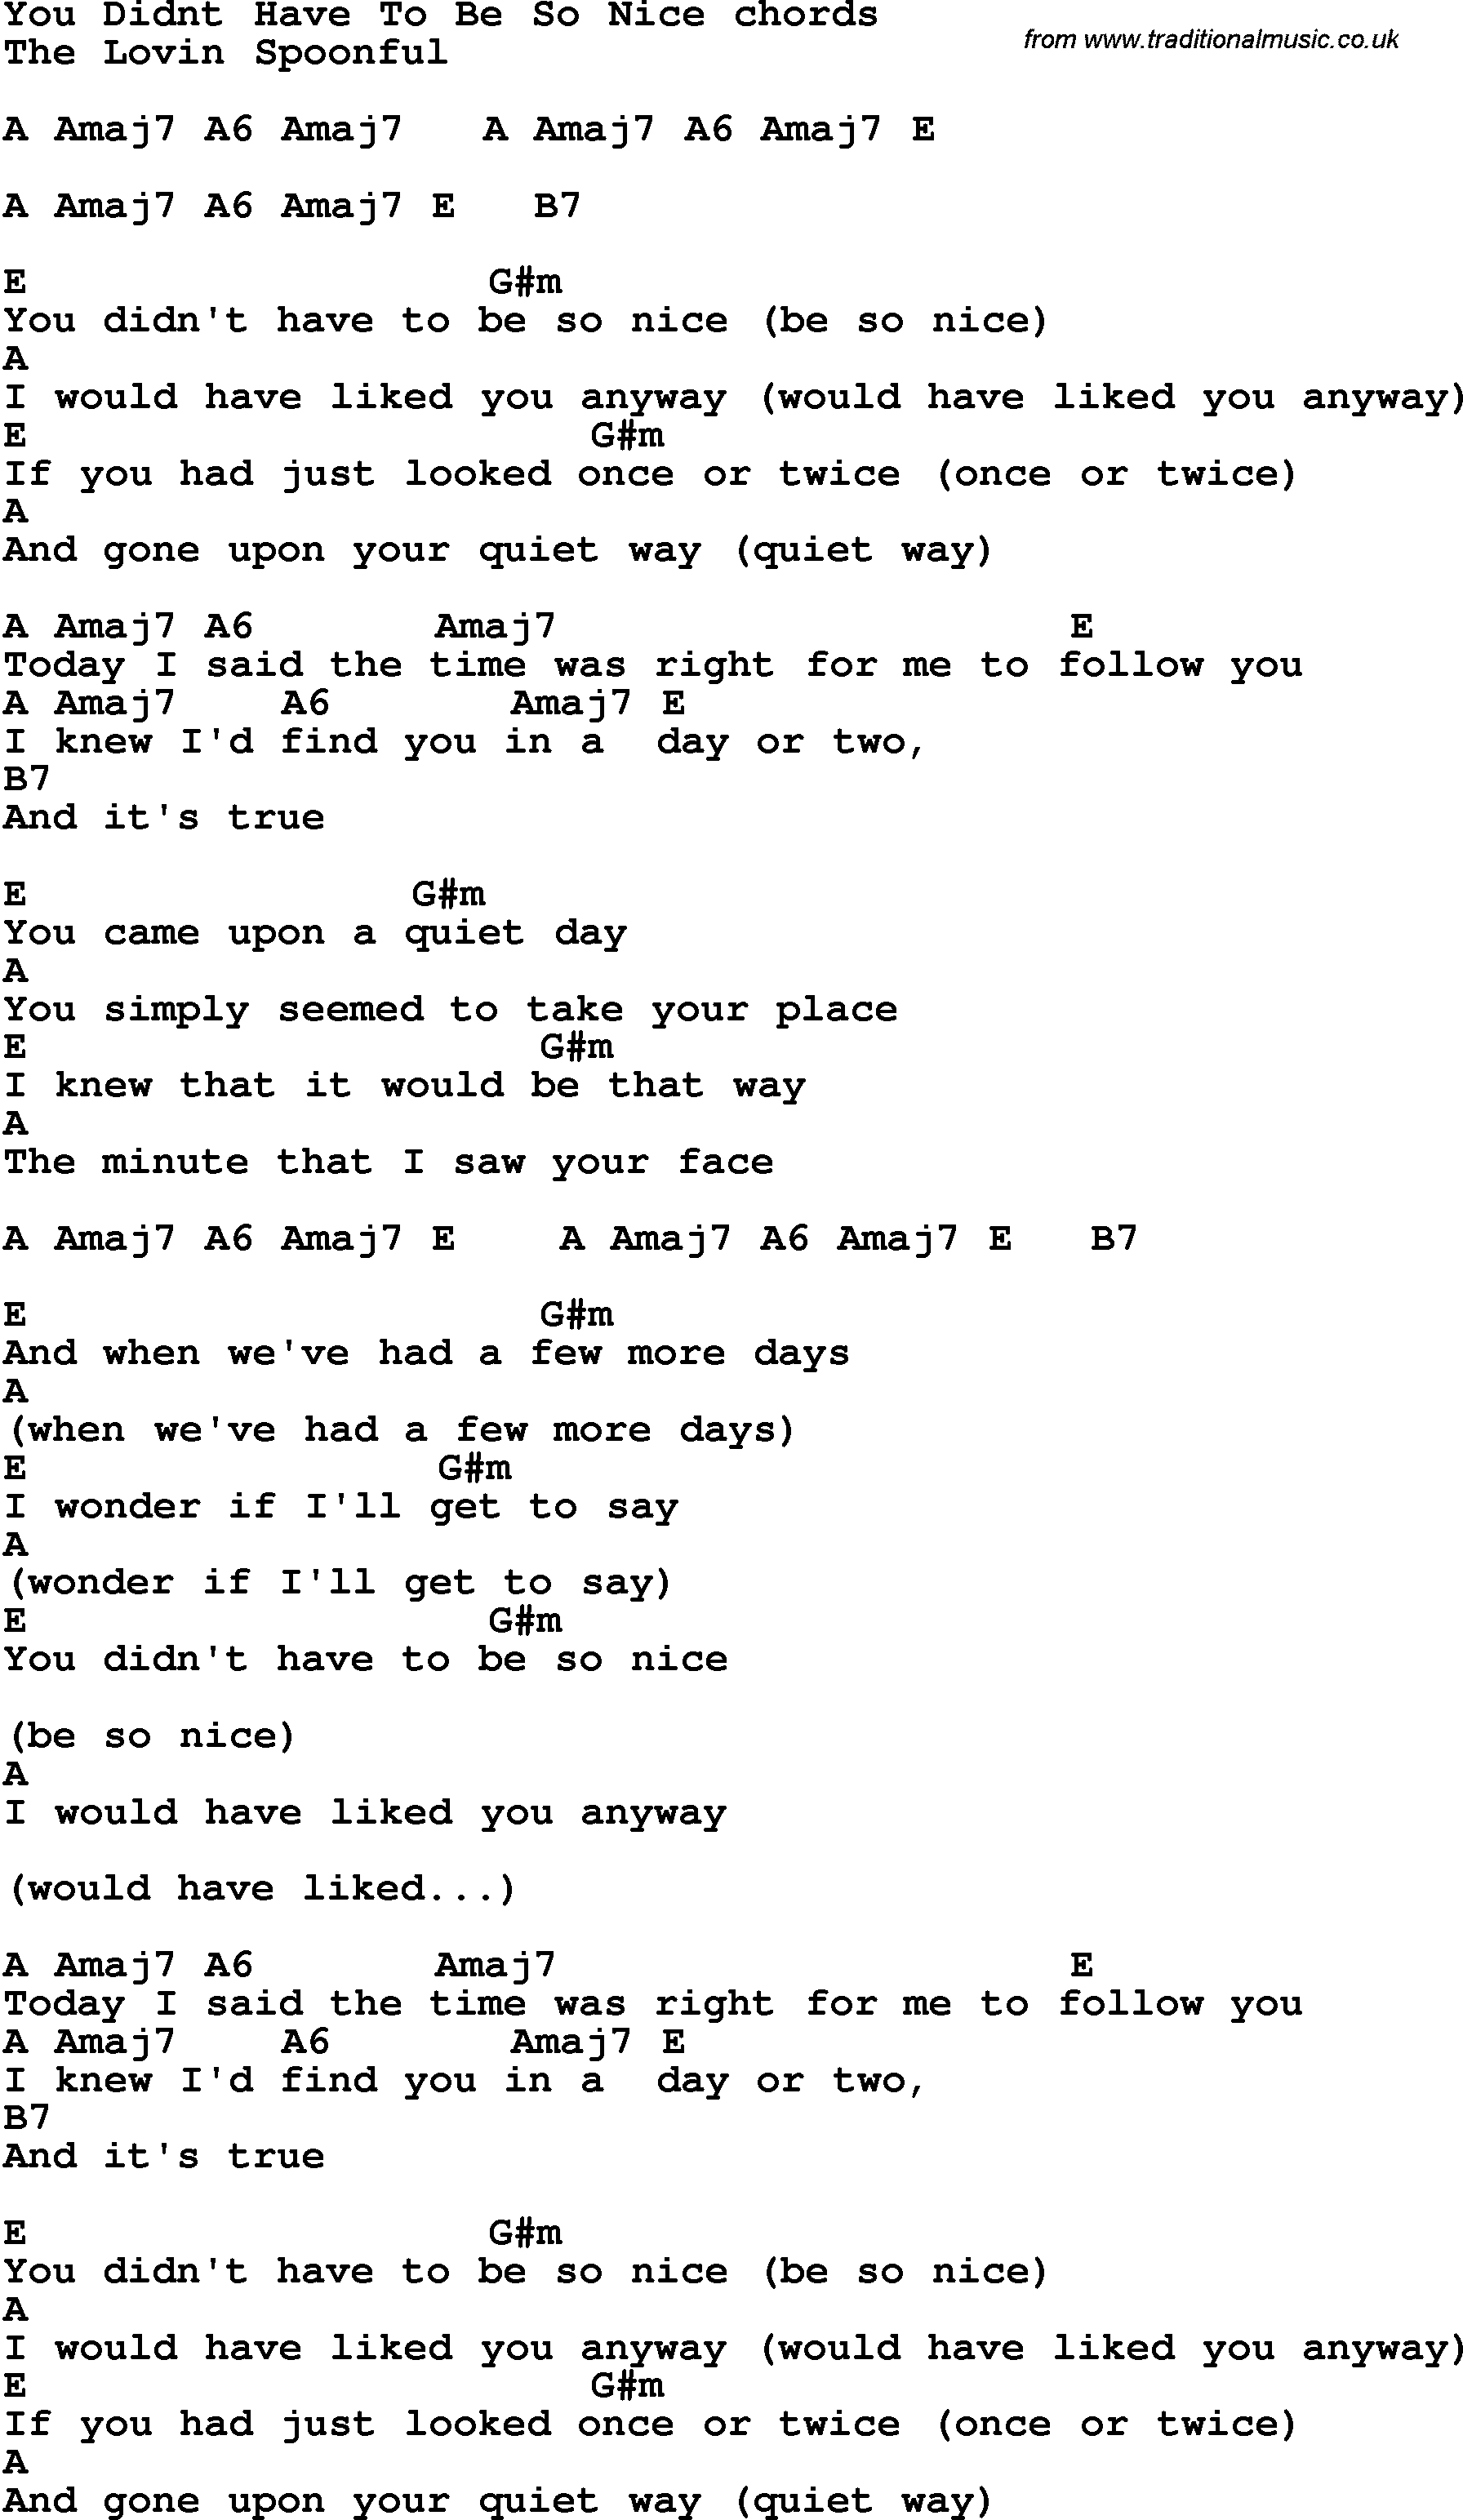 Song Lyrics with guitar chords for You Didn't Have To Be So Nice